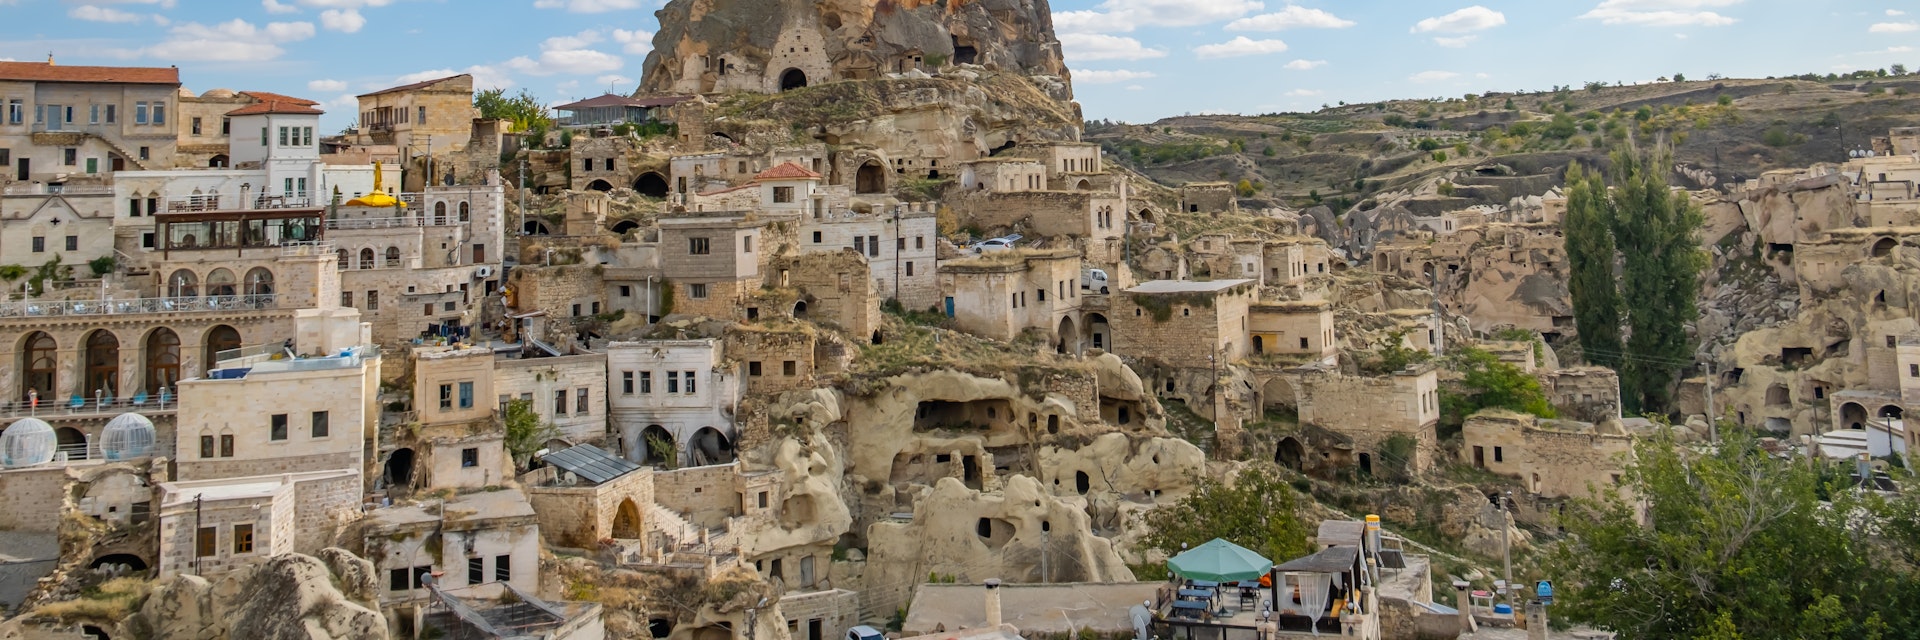 Ortahisar castle or central castle and fairy chimneys in Cappadocia, Turkey at sunset. Ortahisar Castle and traditional houses carved stone. Cave houses in fairy chimneys.